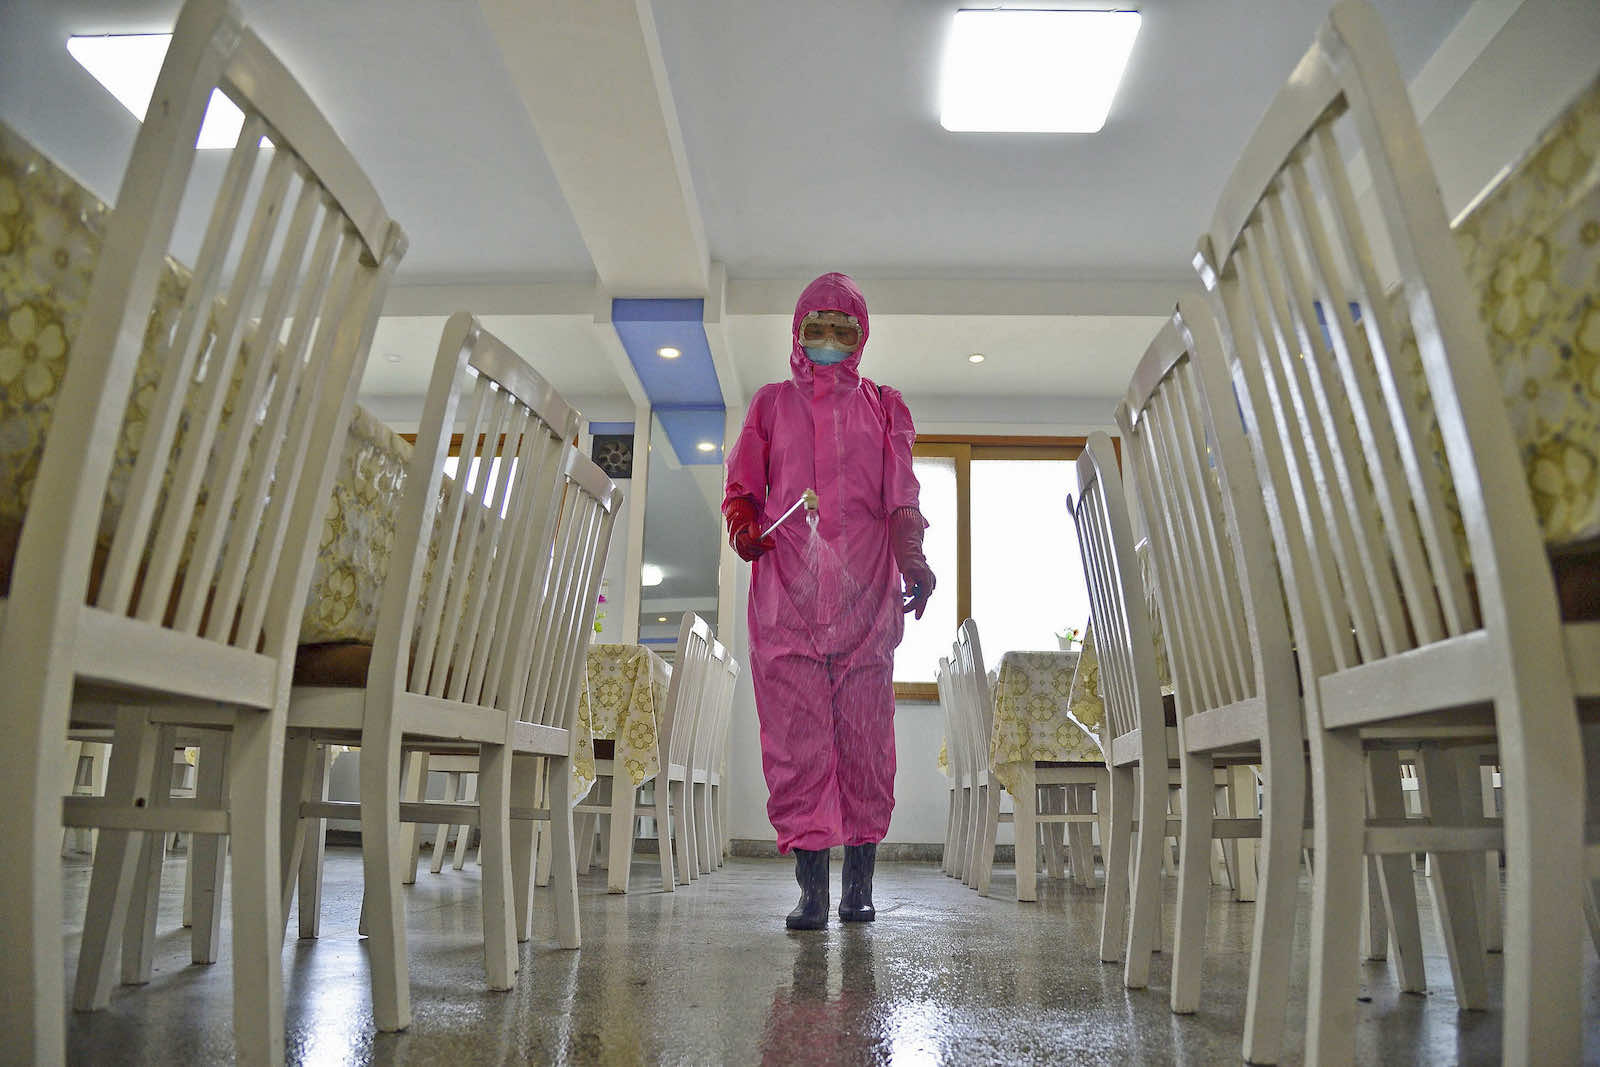 Disinfecting a dining room at a sanitary supplies factory in Pyongyang on 16 May (Kyodo News via Getty Images)